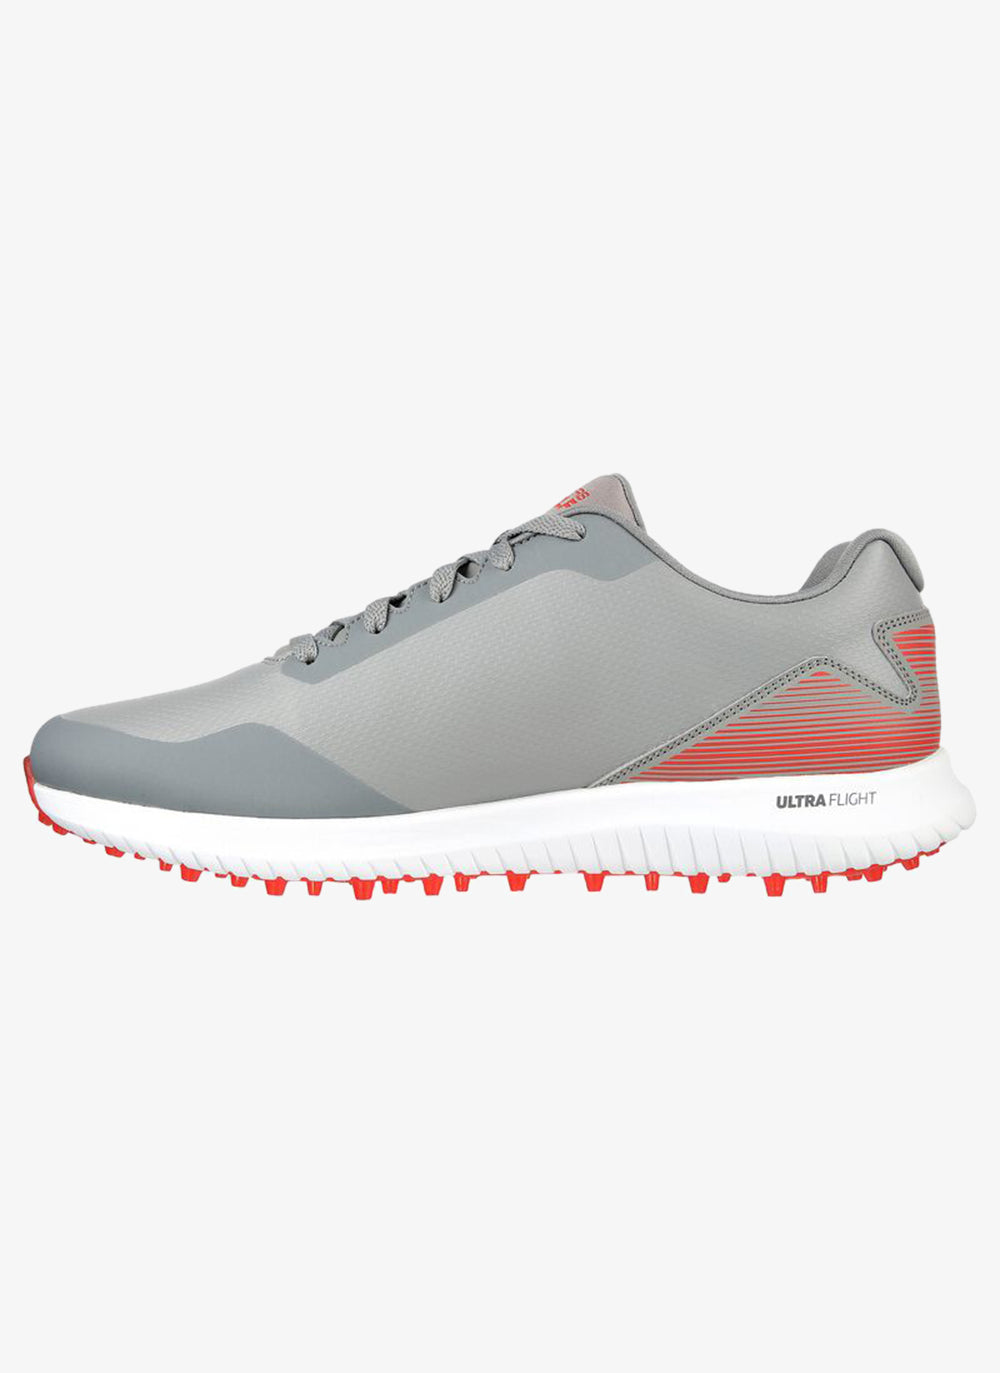 Skechers Go Golf Max 2 Arch Fit Golf Shoes 214028